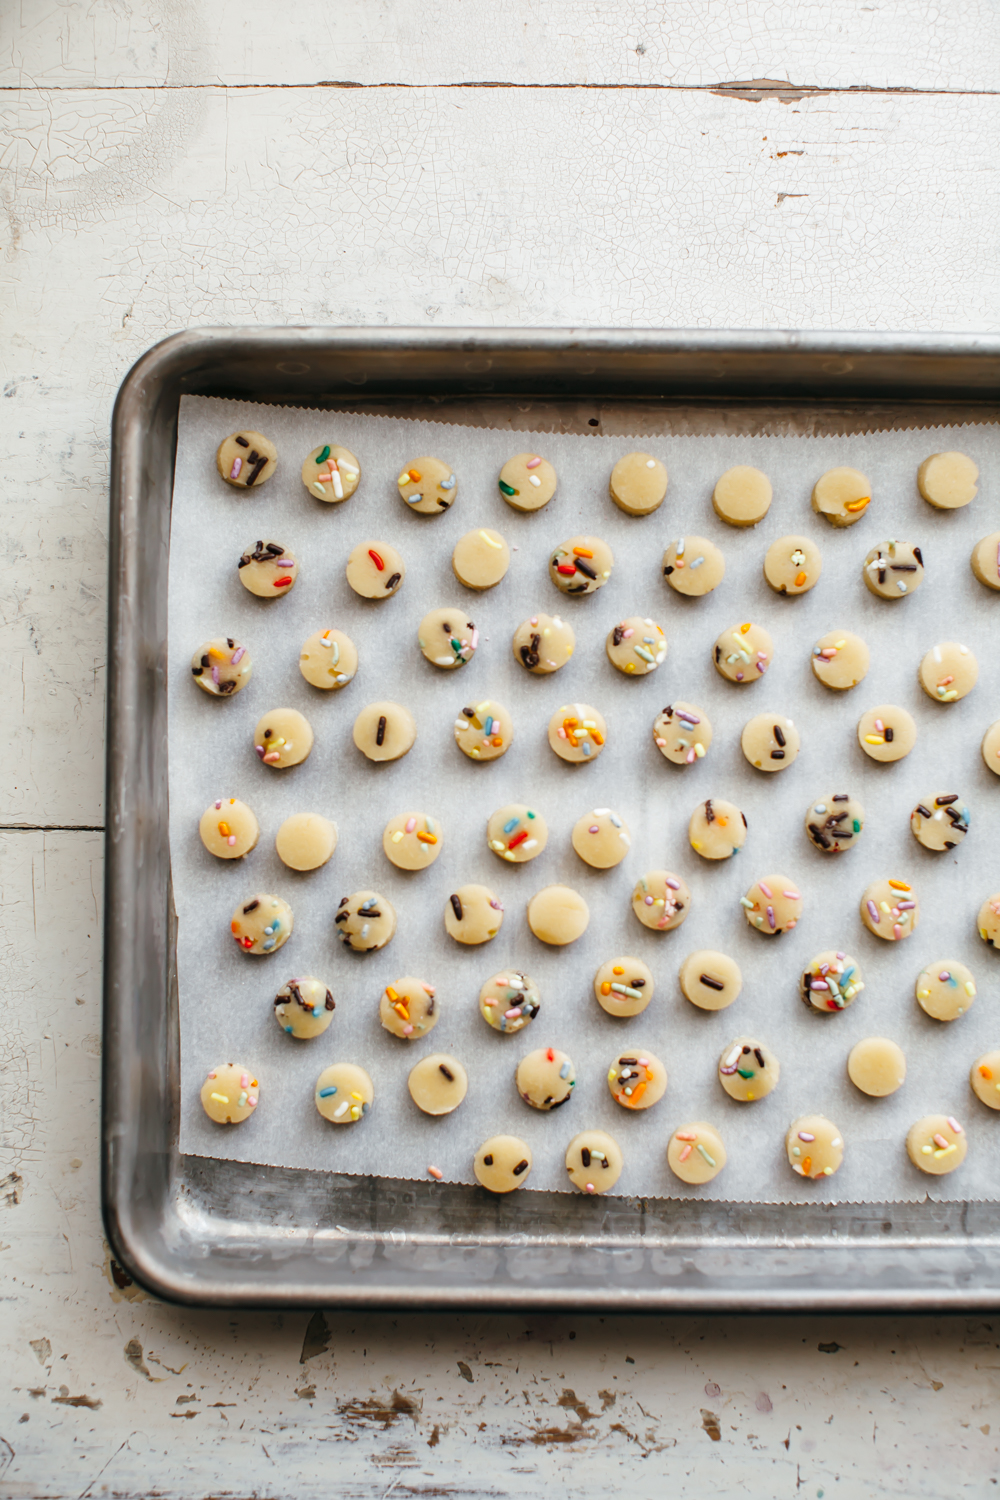 Airline Cookie Sheet Cake Recipe, Molly Yeh